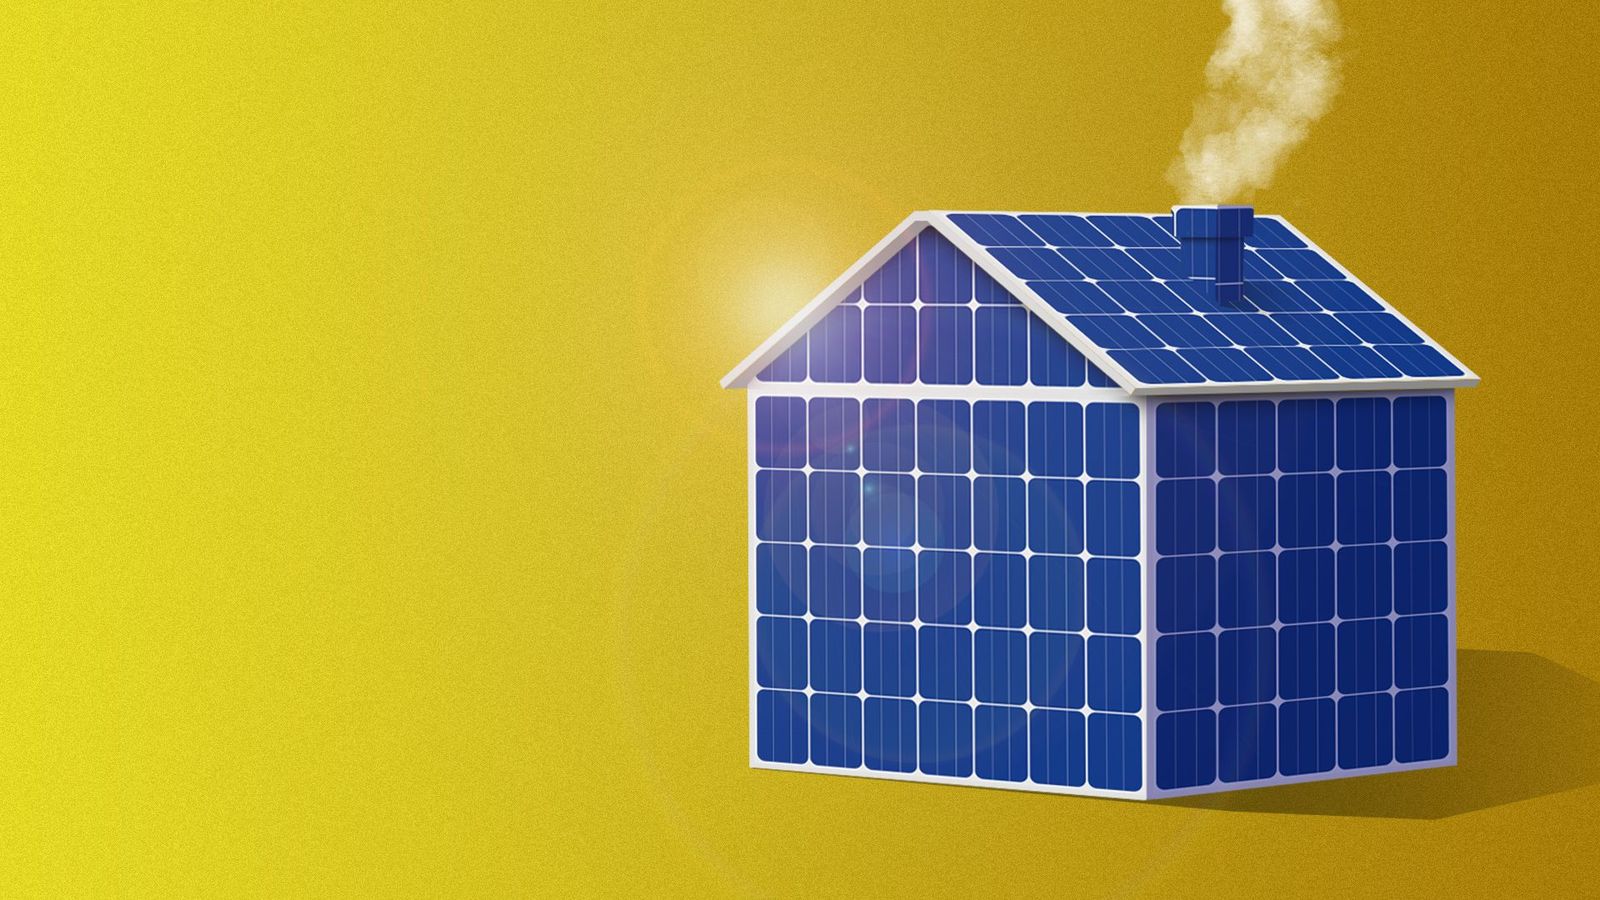 Solar Energy Adoption: Information for Homeowners and Small Businesses